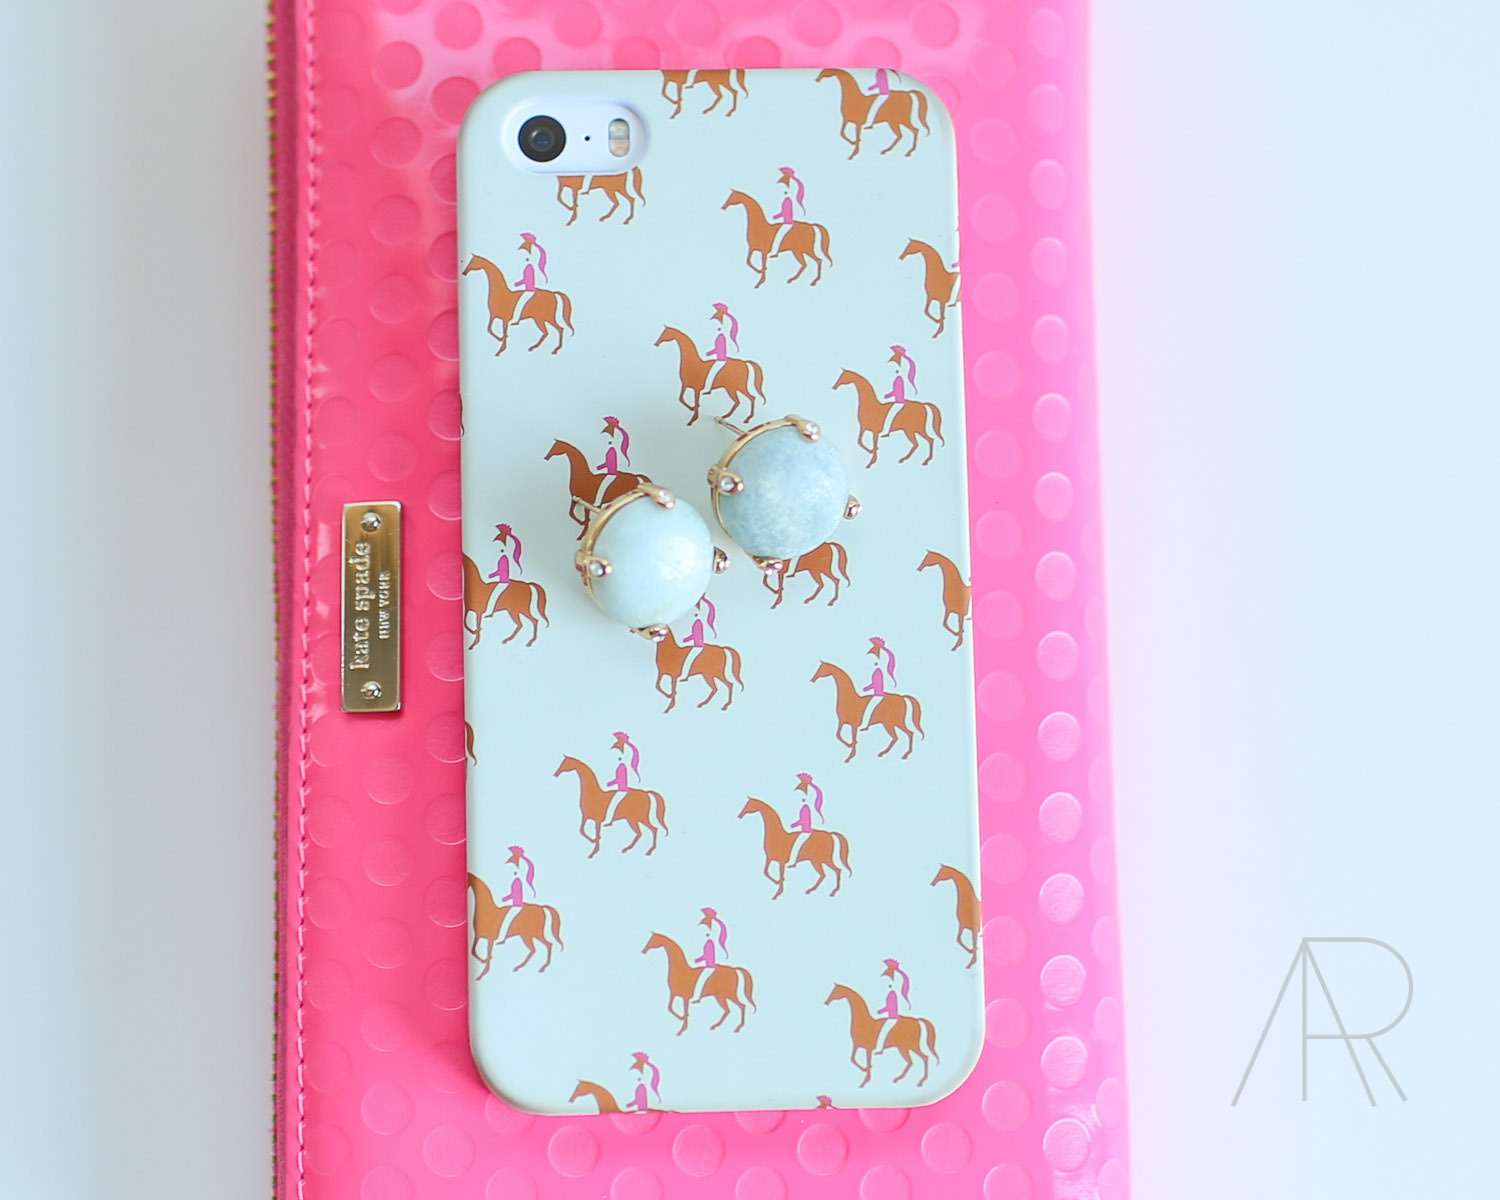 | Kate Spade Wallet | Kate Spade Quarry Earrings | Anthropology iPhone 5s Cover |